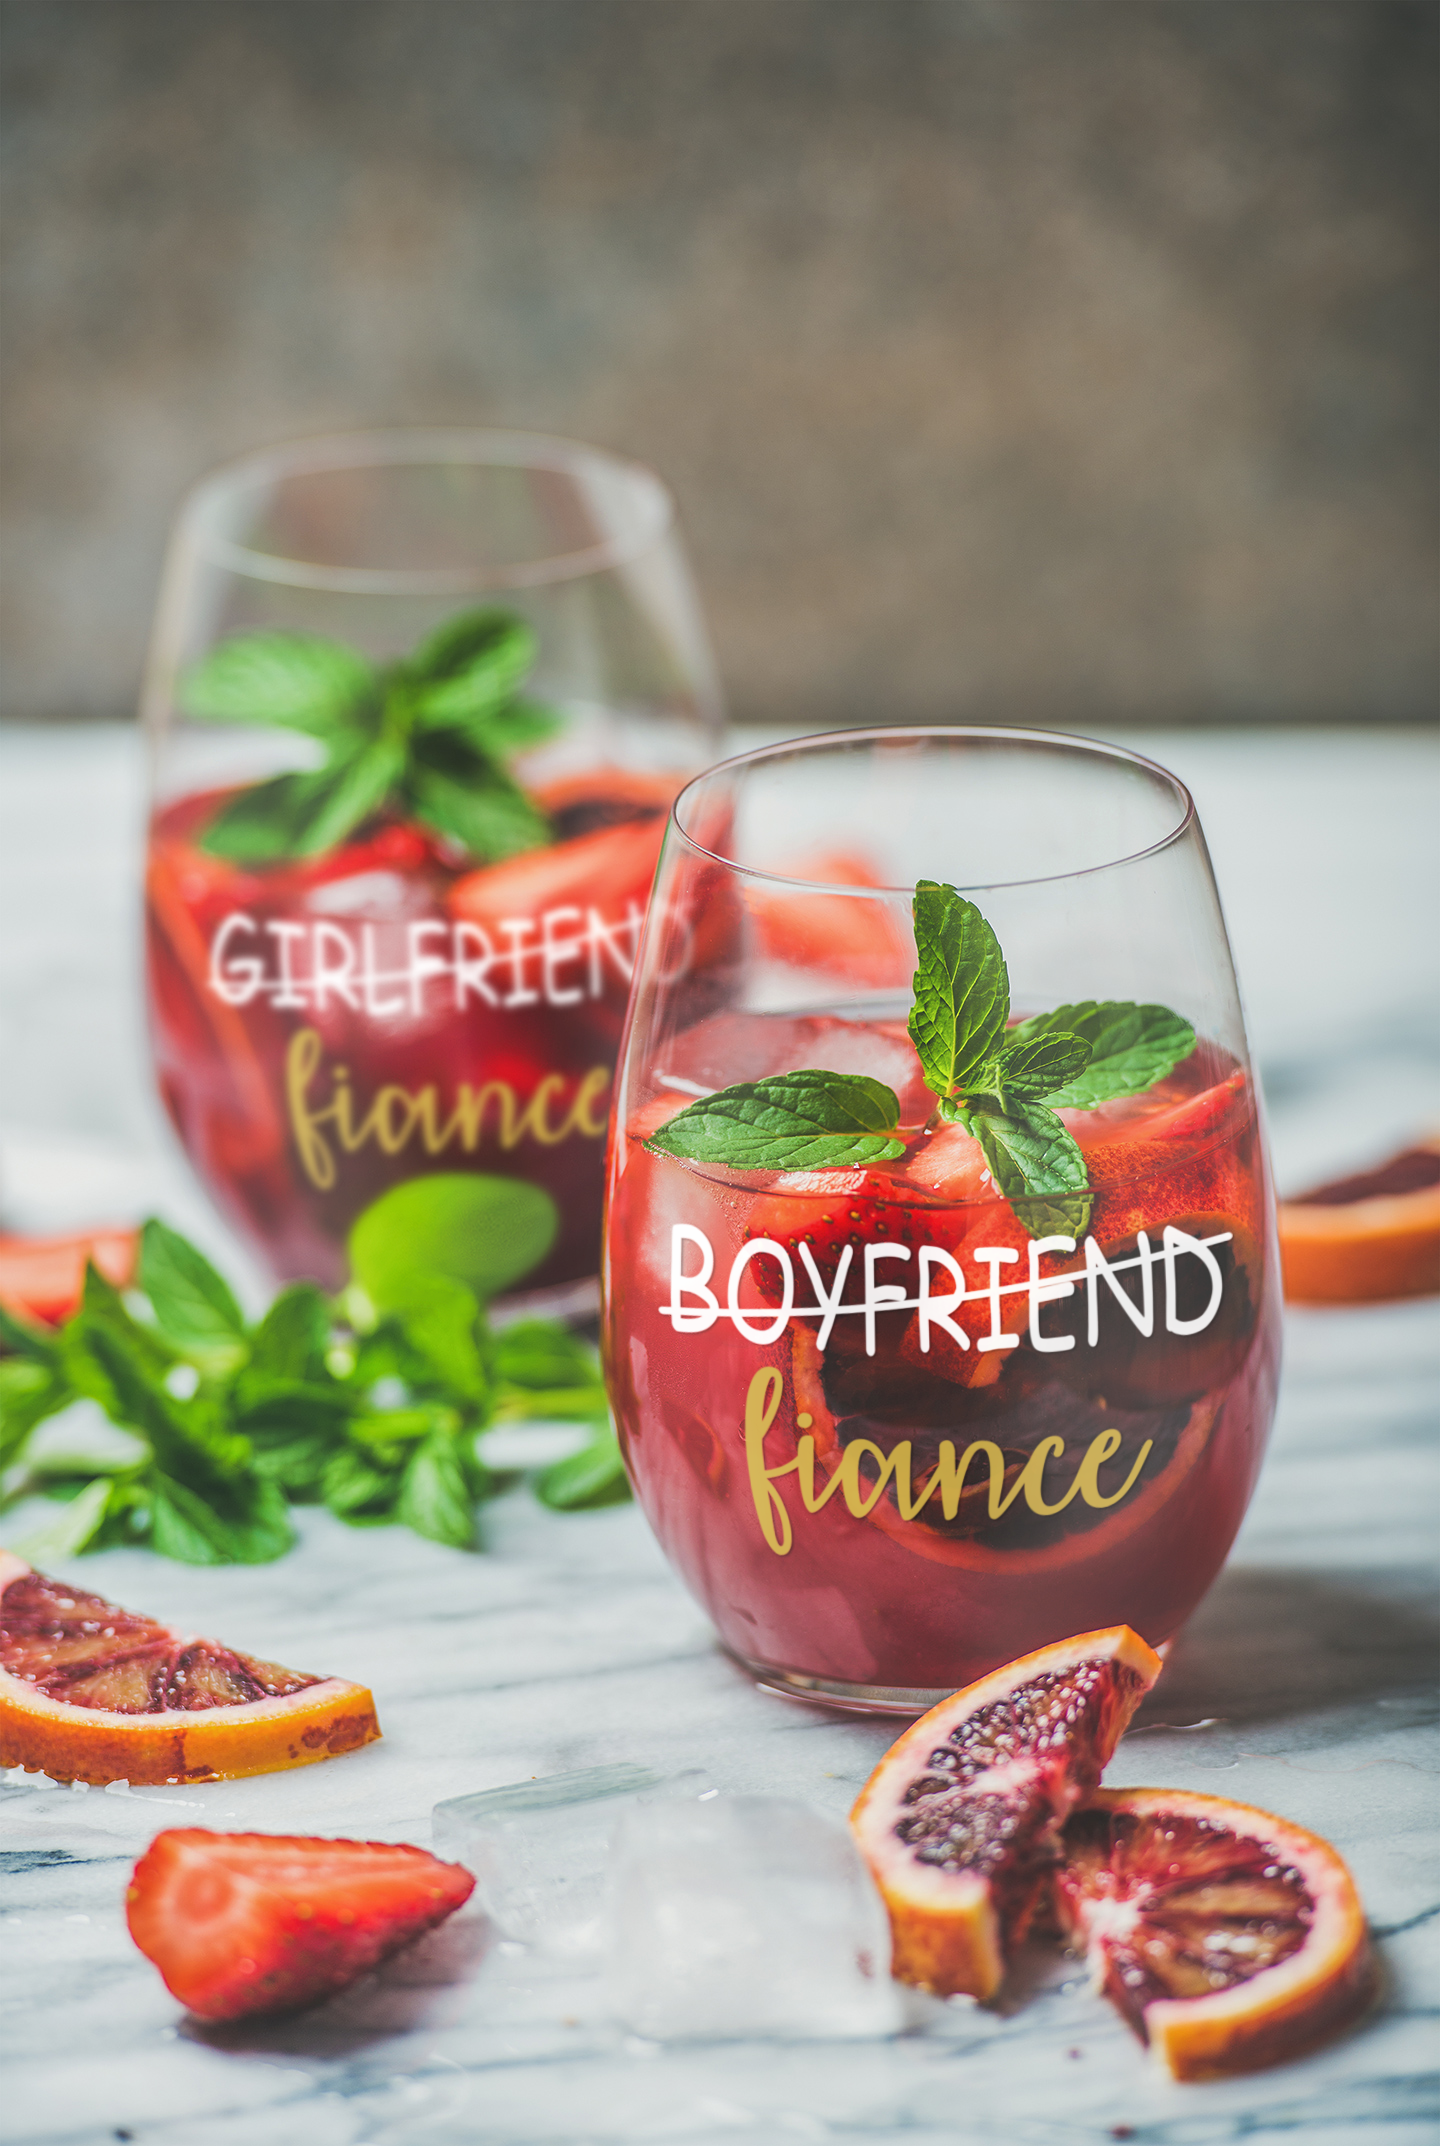 Engagement Gifts for Couples - Boyfriend Girlfriend Wine glasses